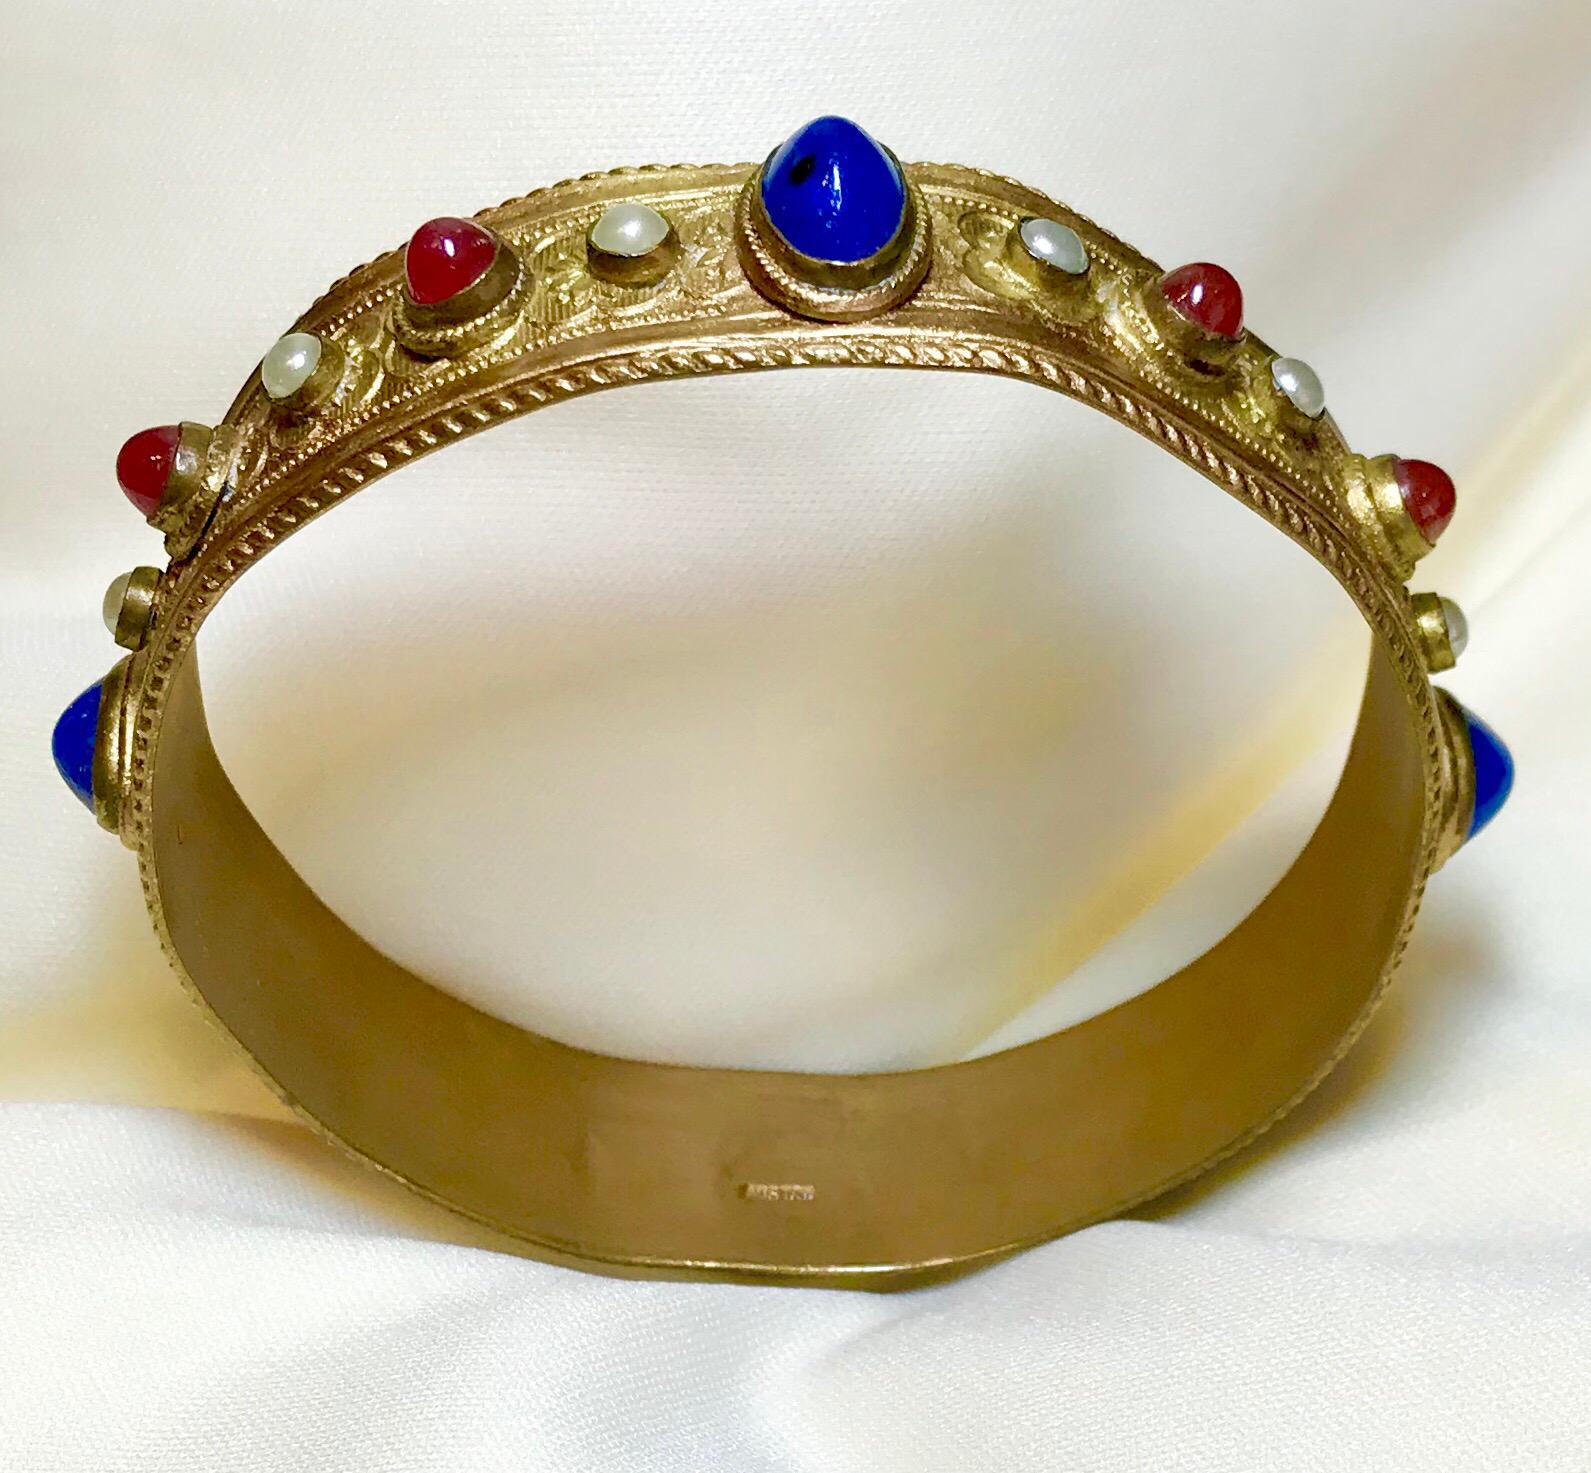 Circa 1920s Austrian Lapis-Blue Glass Cabocon Jeweled Bangle  In Good Condition For Sale In Long Beach, CA